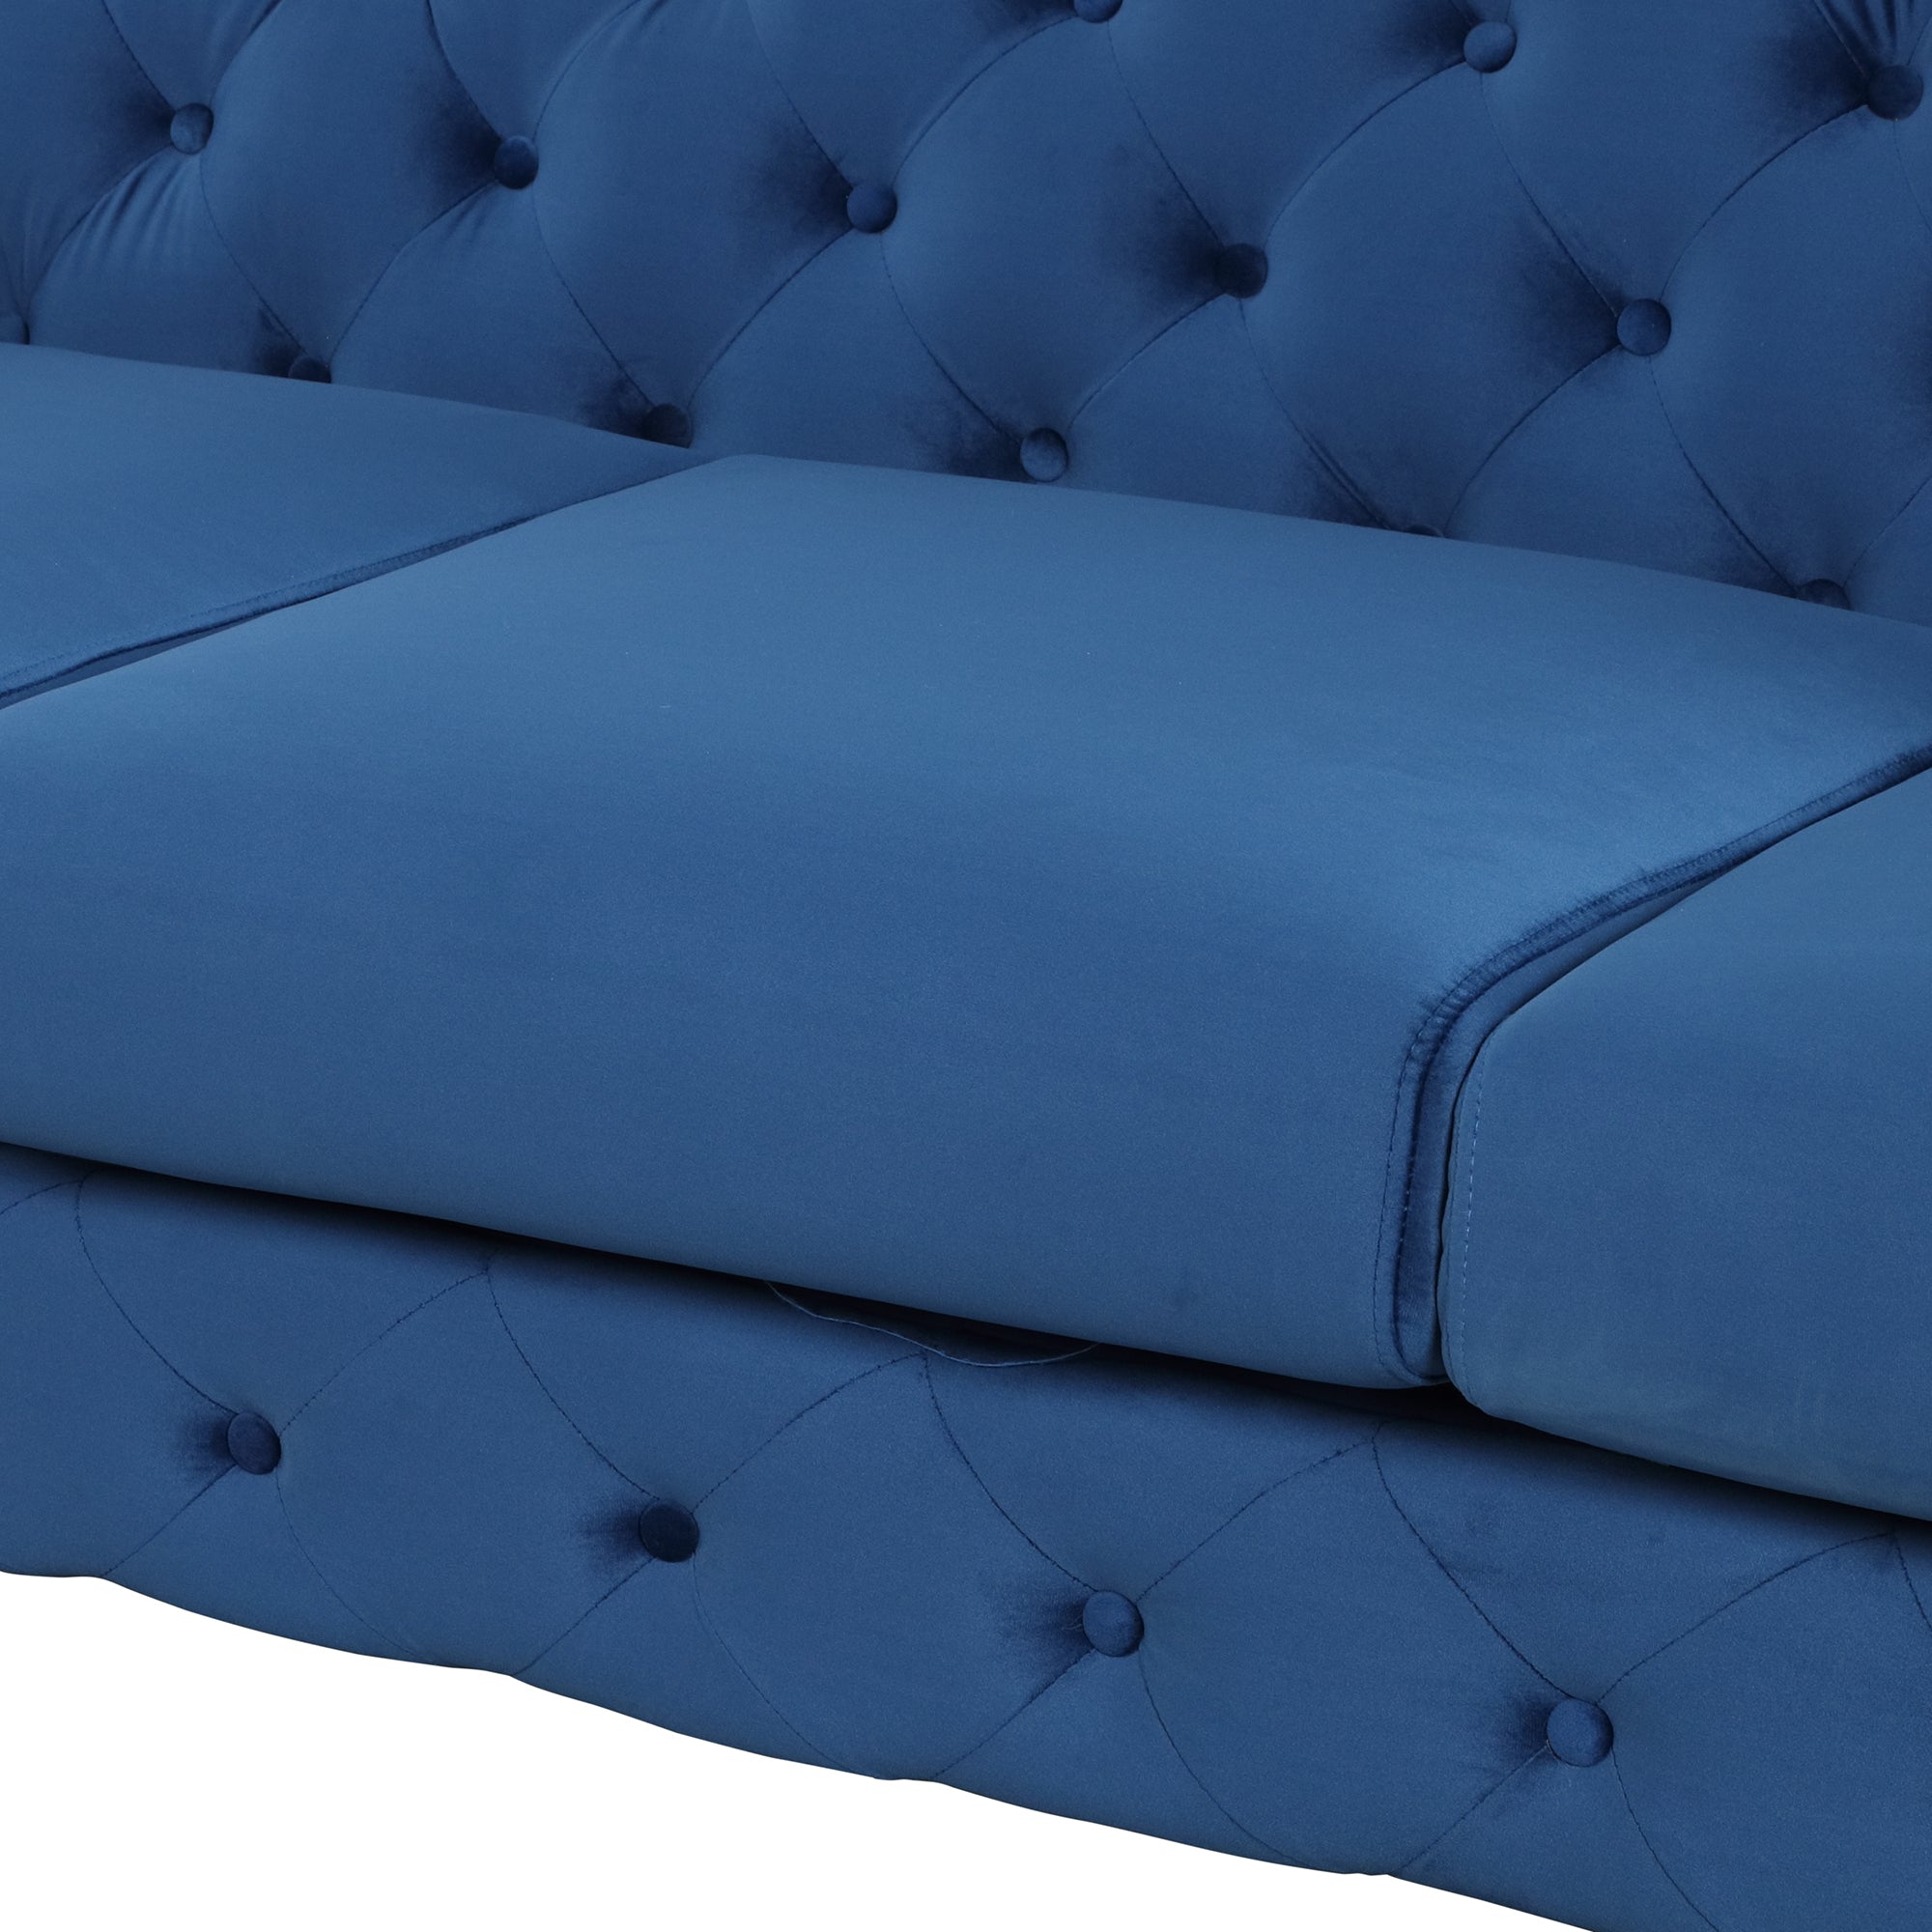 85.5" Velvet Upholstered Sofa with Sturdy Metal Legs,Modern Sofa Couch with Button Tufted Back, 3 Seater Sofa Couch for Living Room,Apartment,Home Office,Blue